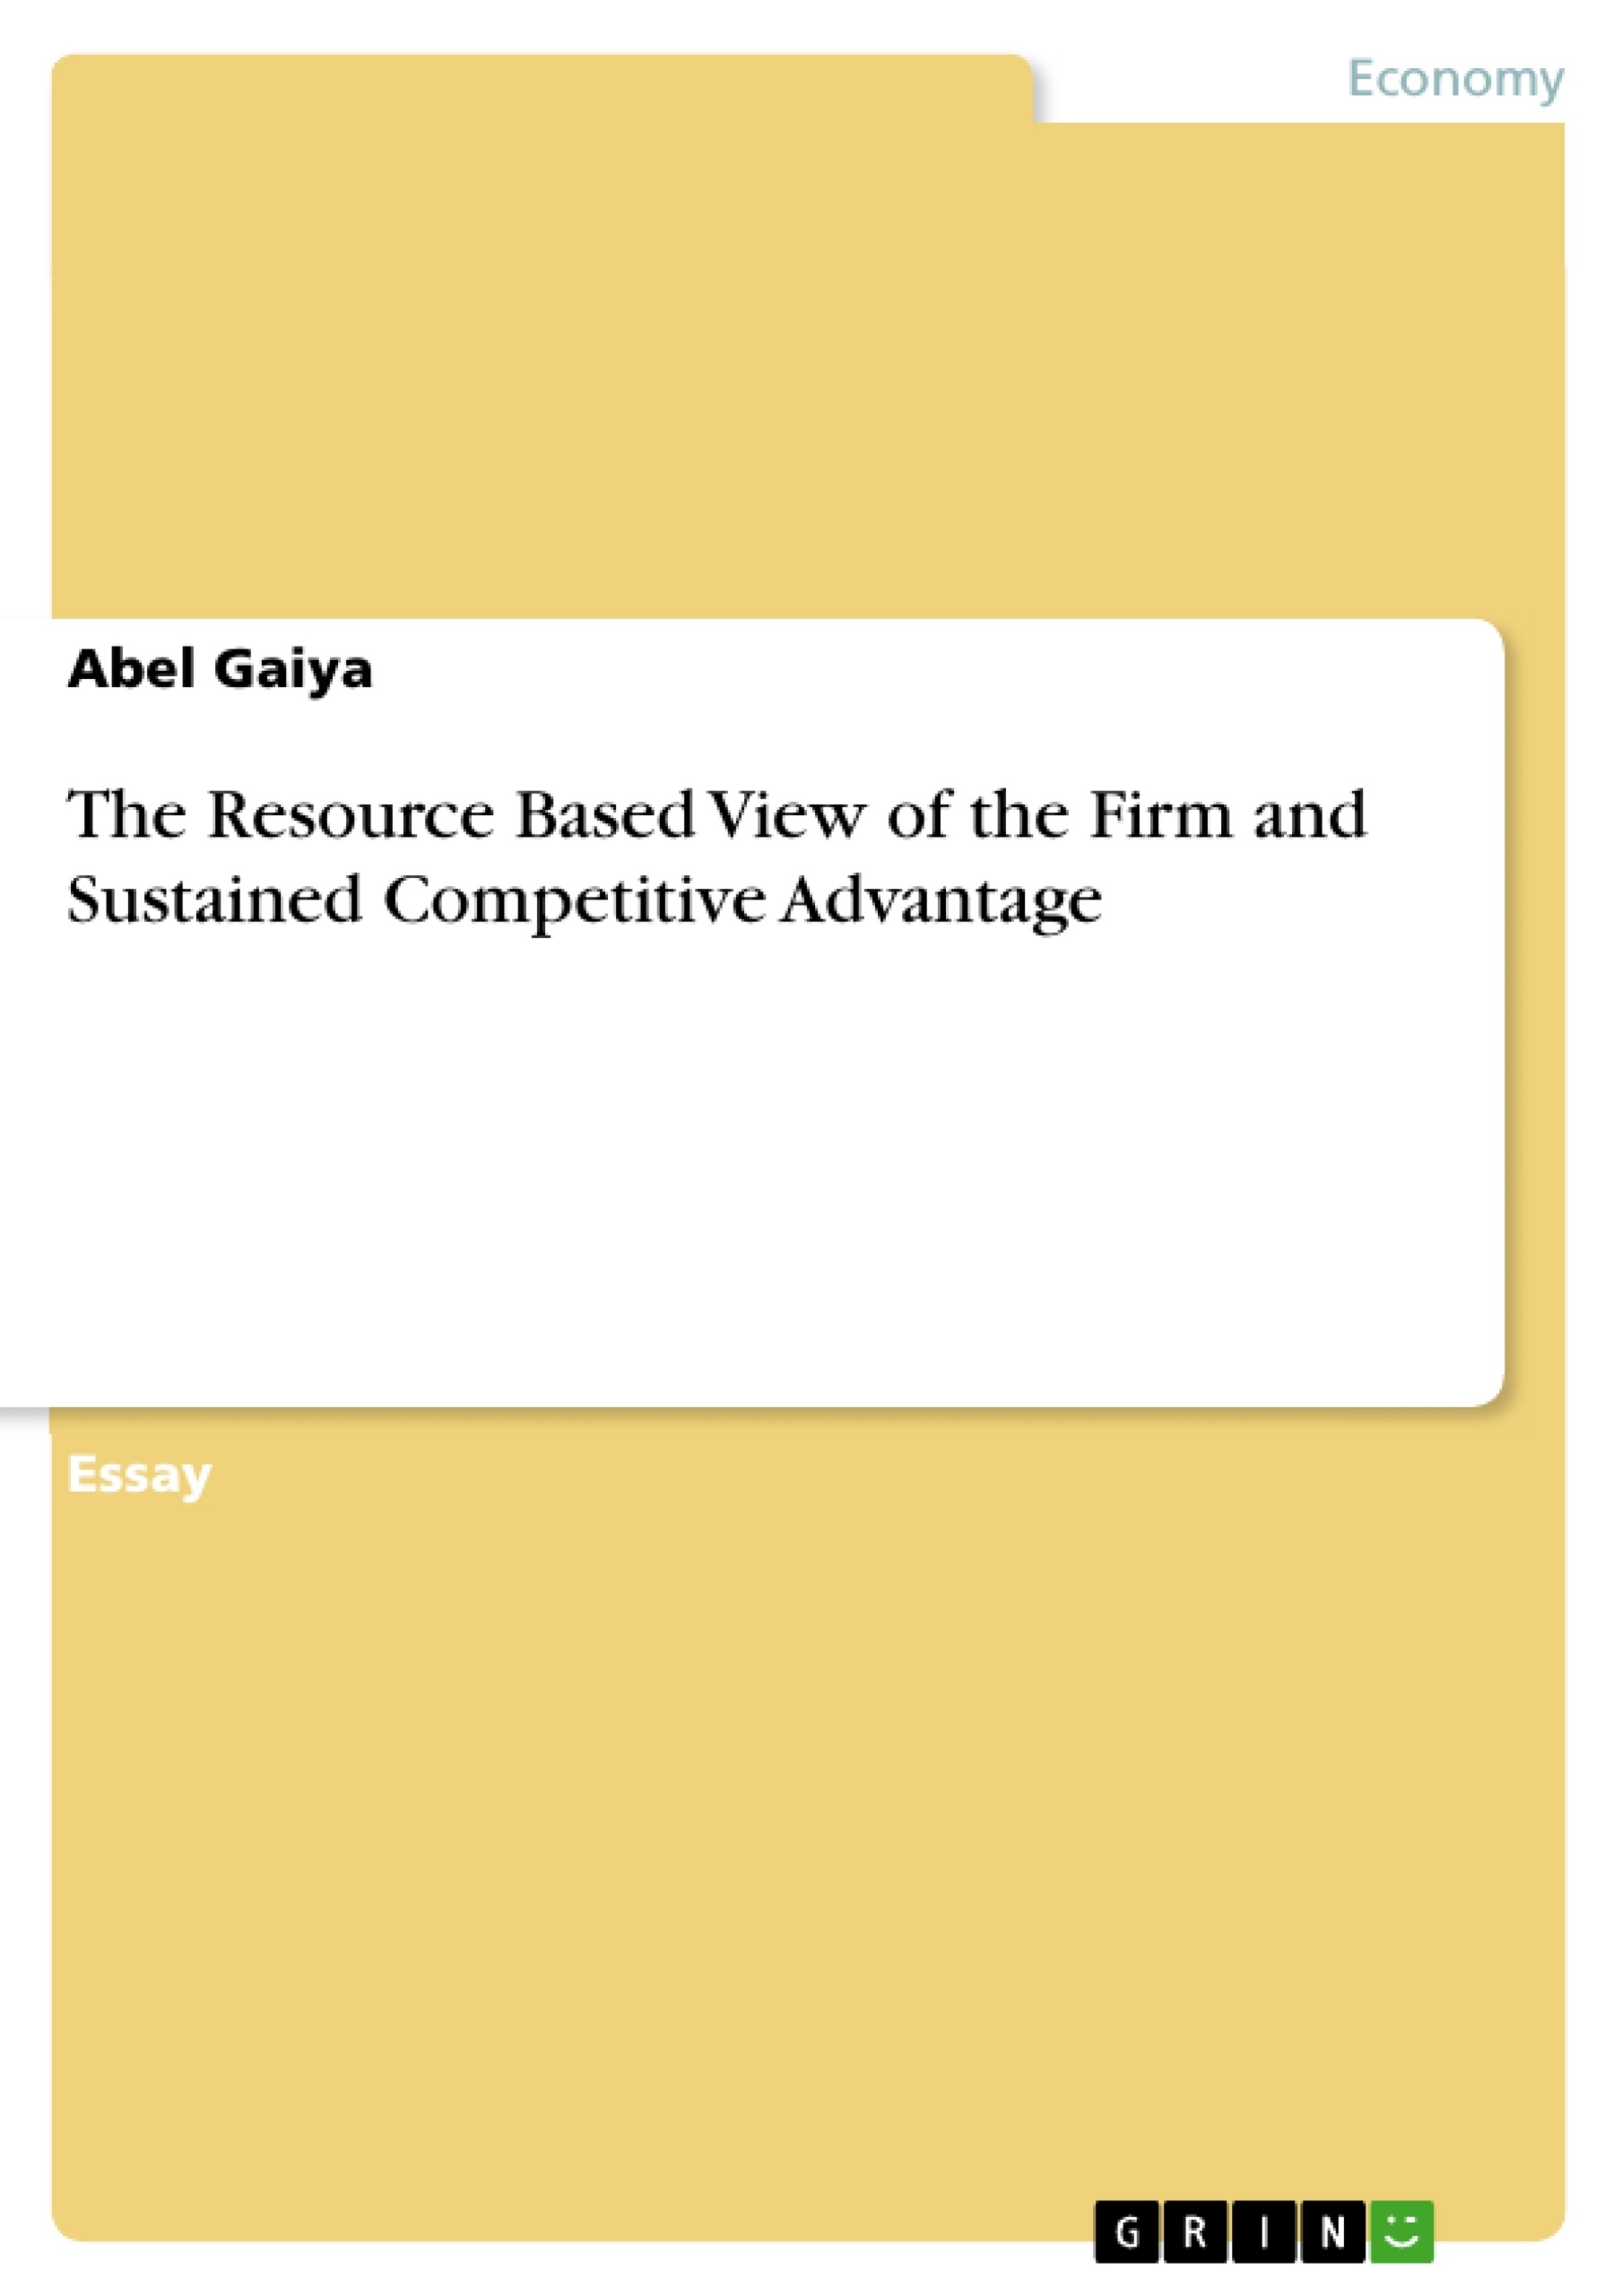 Title: The Resource Based View of the Firm and Sustained Competitive Advantage